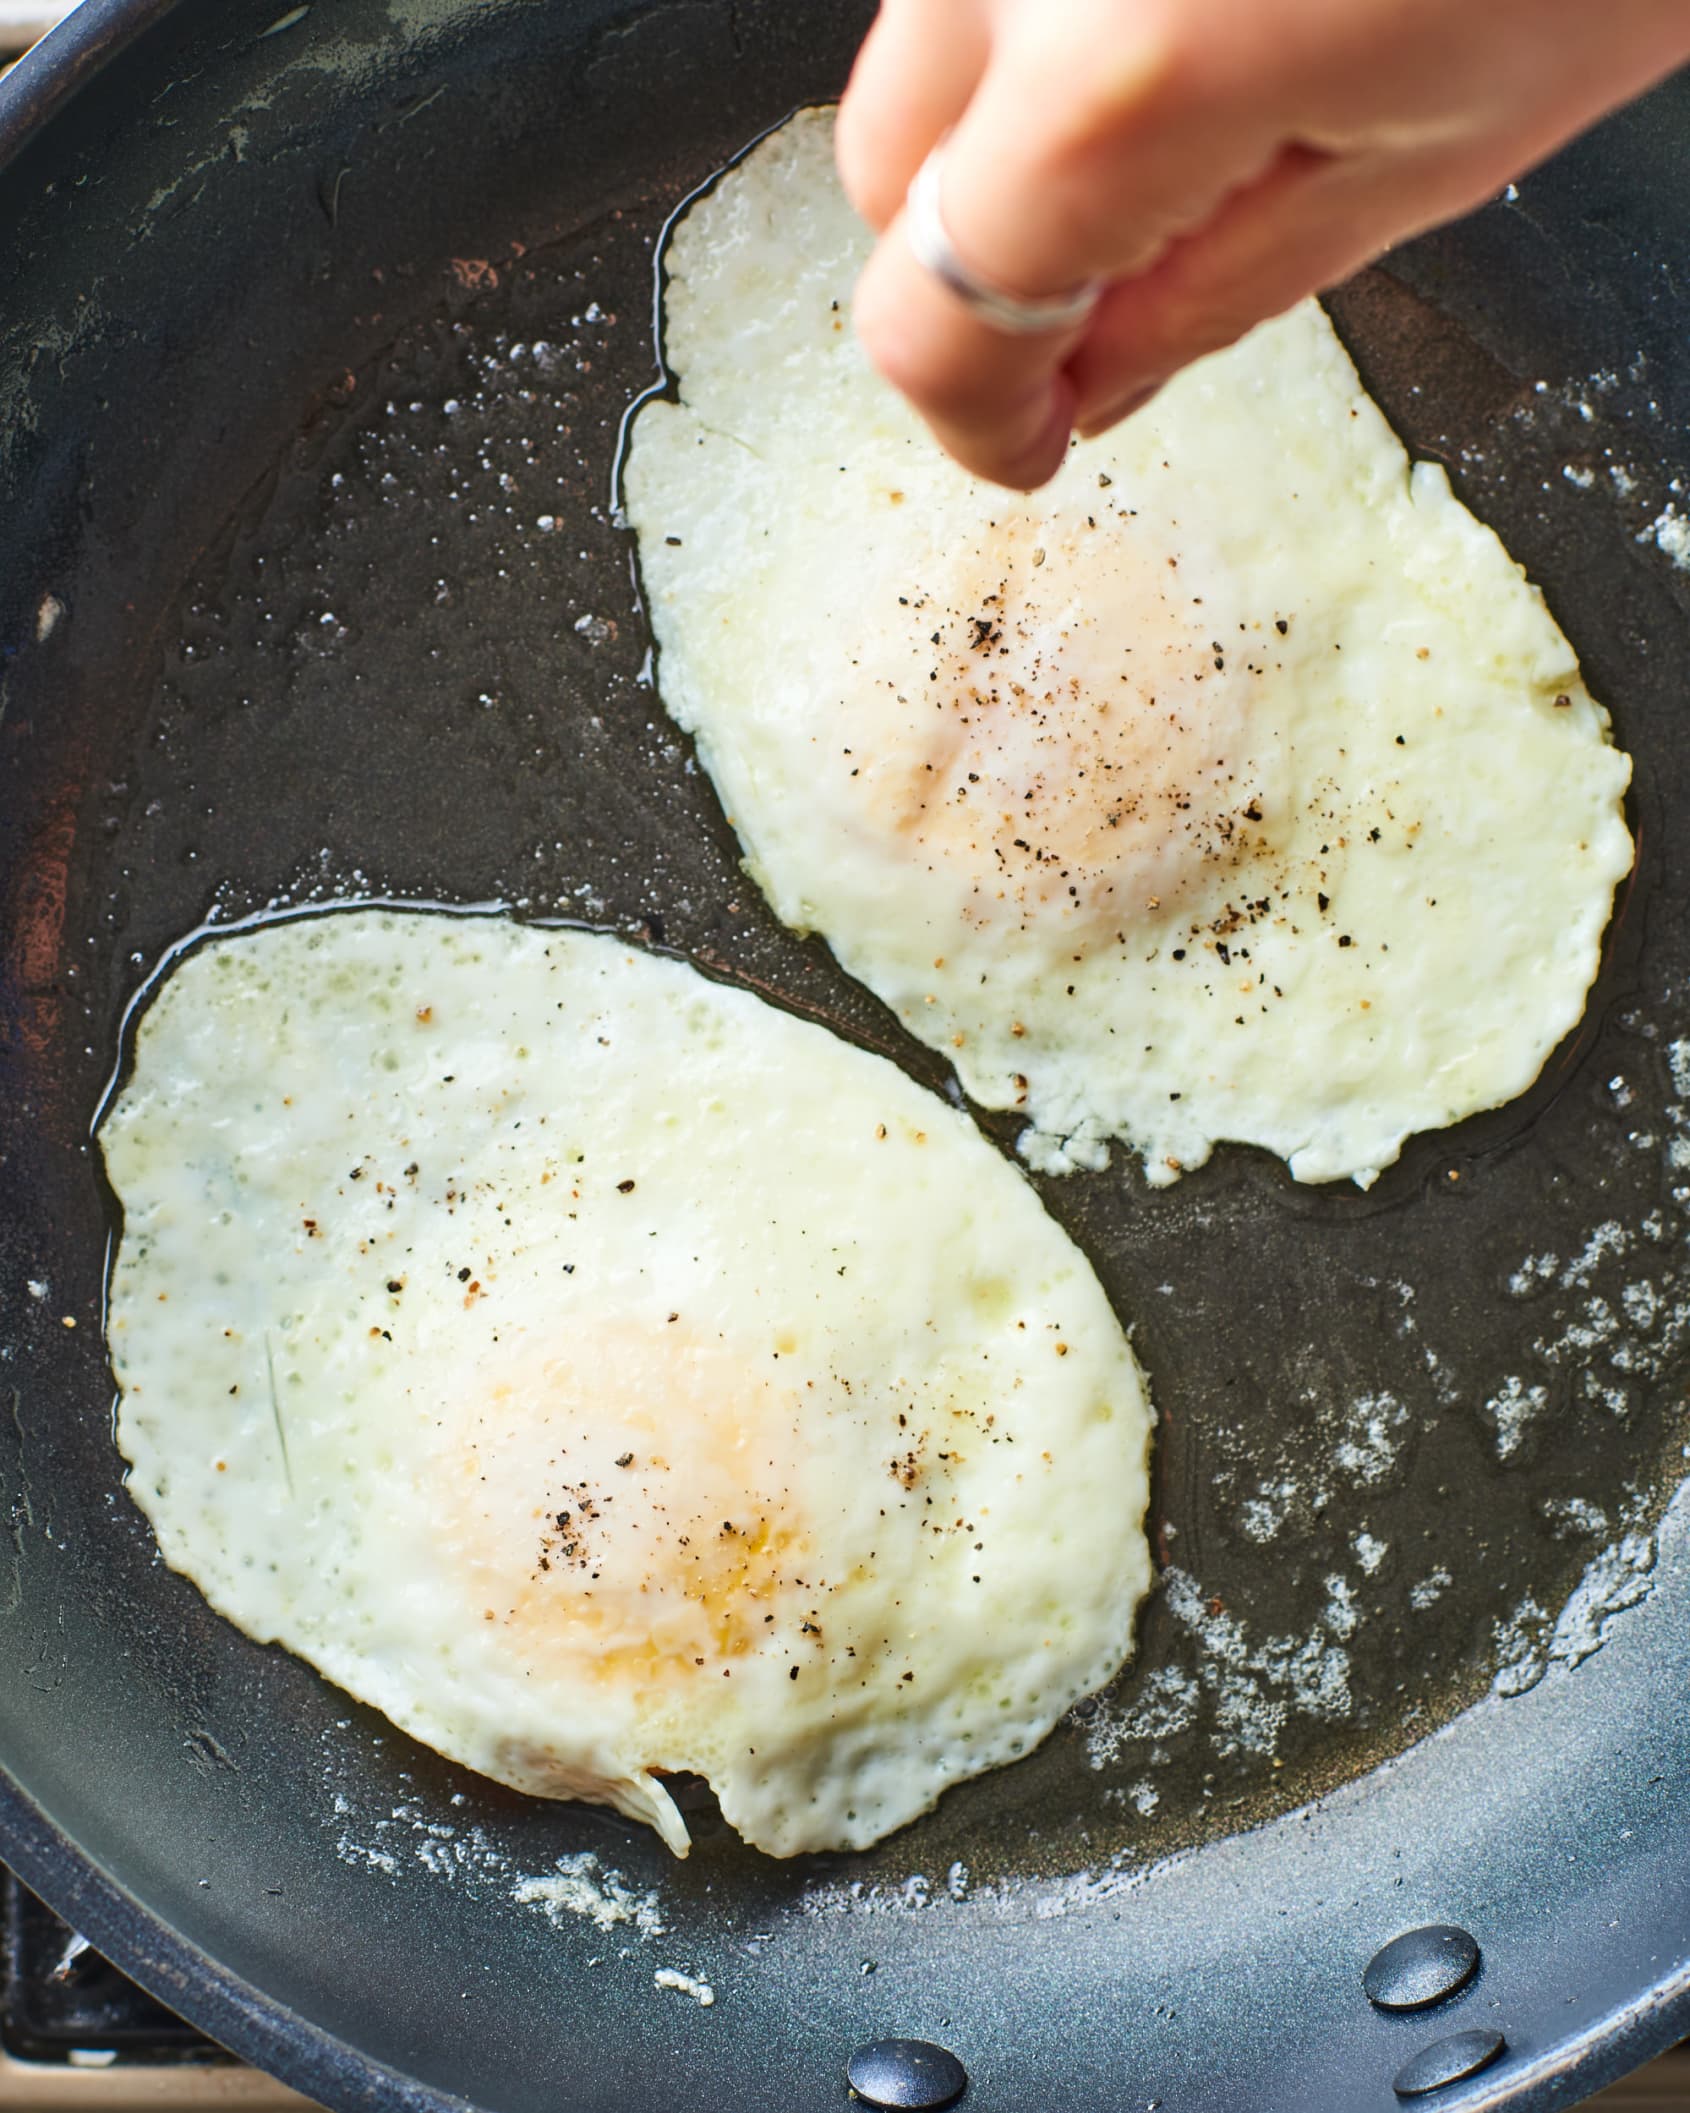 How to Make a Perfect Over-Easy Egg